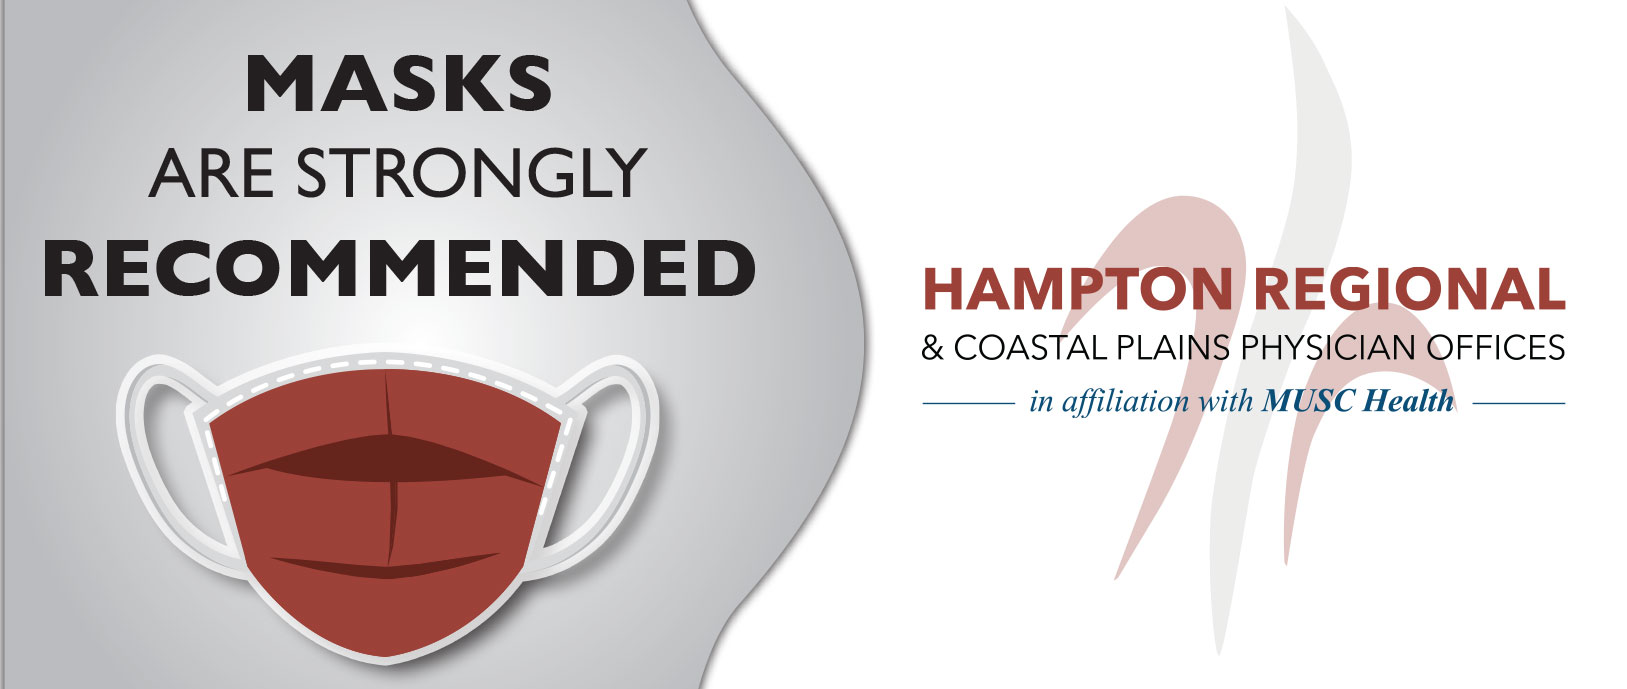 Mask are strongly recommended

Hampton Regional & Coastal Plains Physician Offices